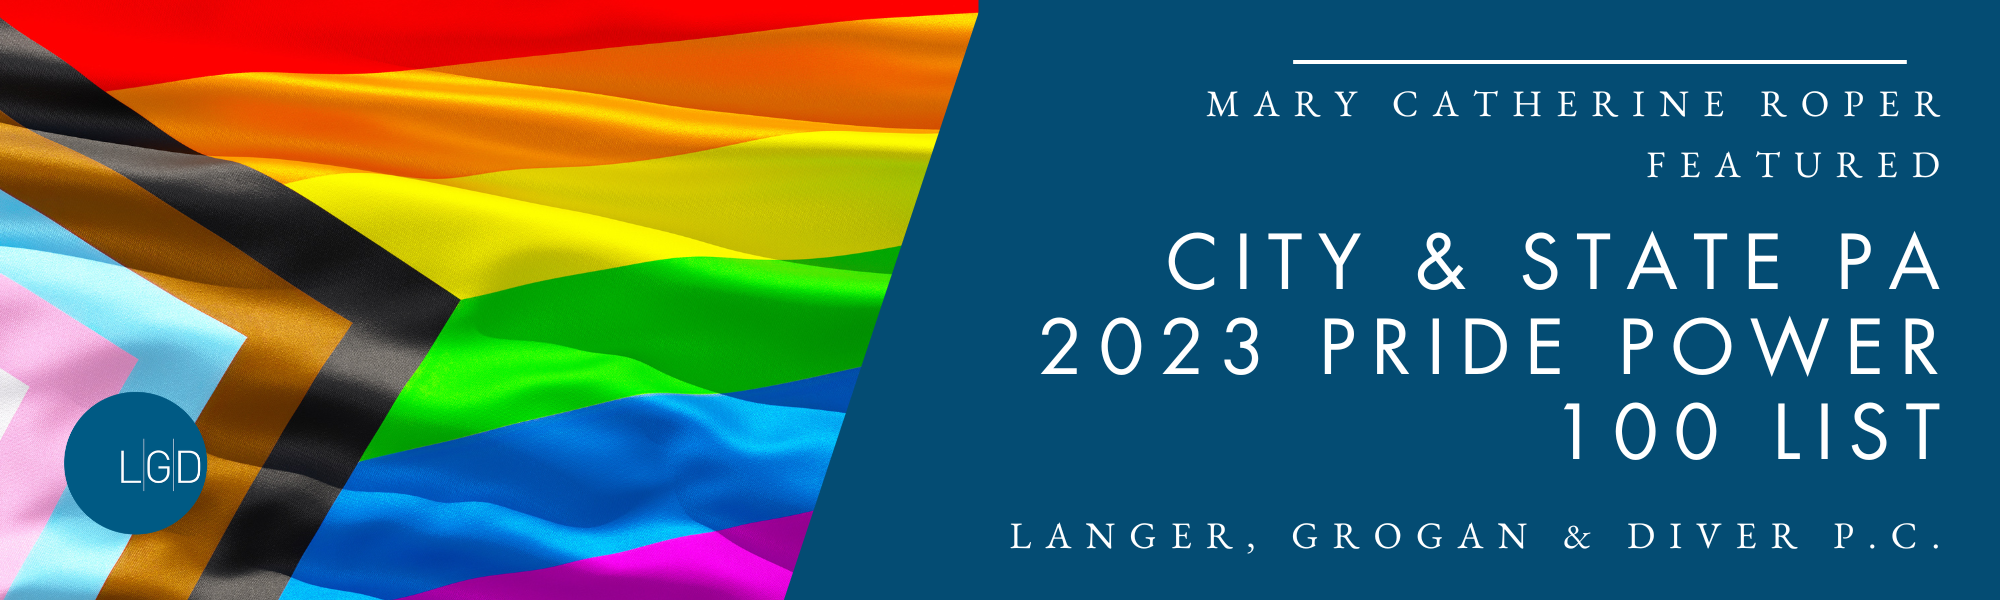 Decorative banner image with a pride flag and text that reads Mary Catherine Roper Featured in City & State PA 2023 Pride Power 100 List